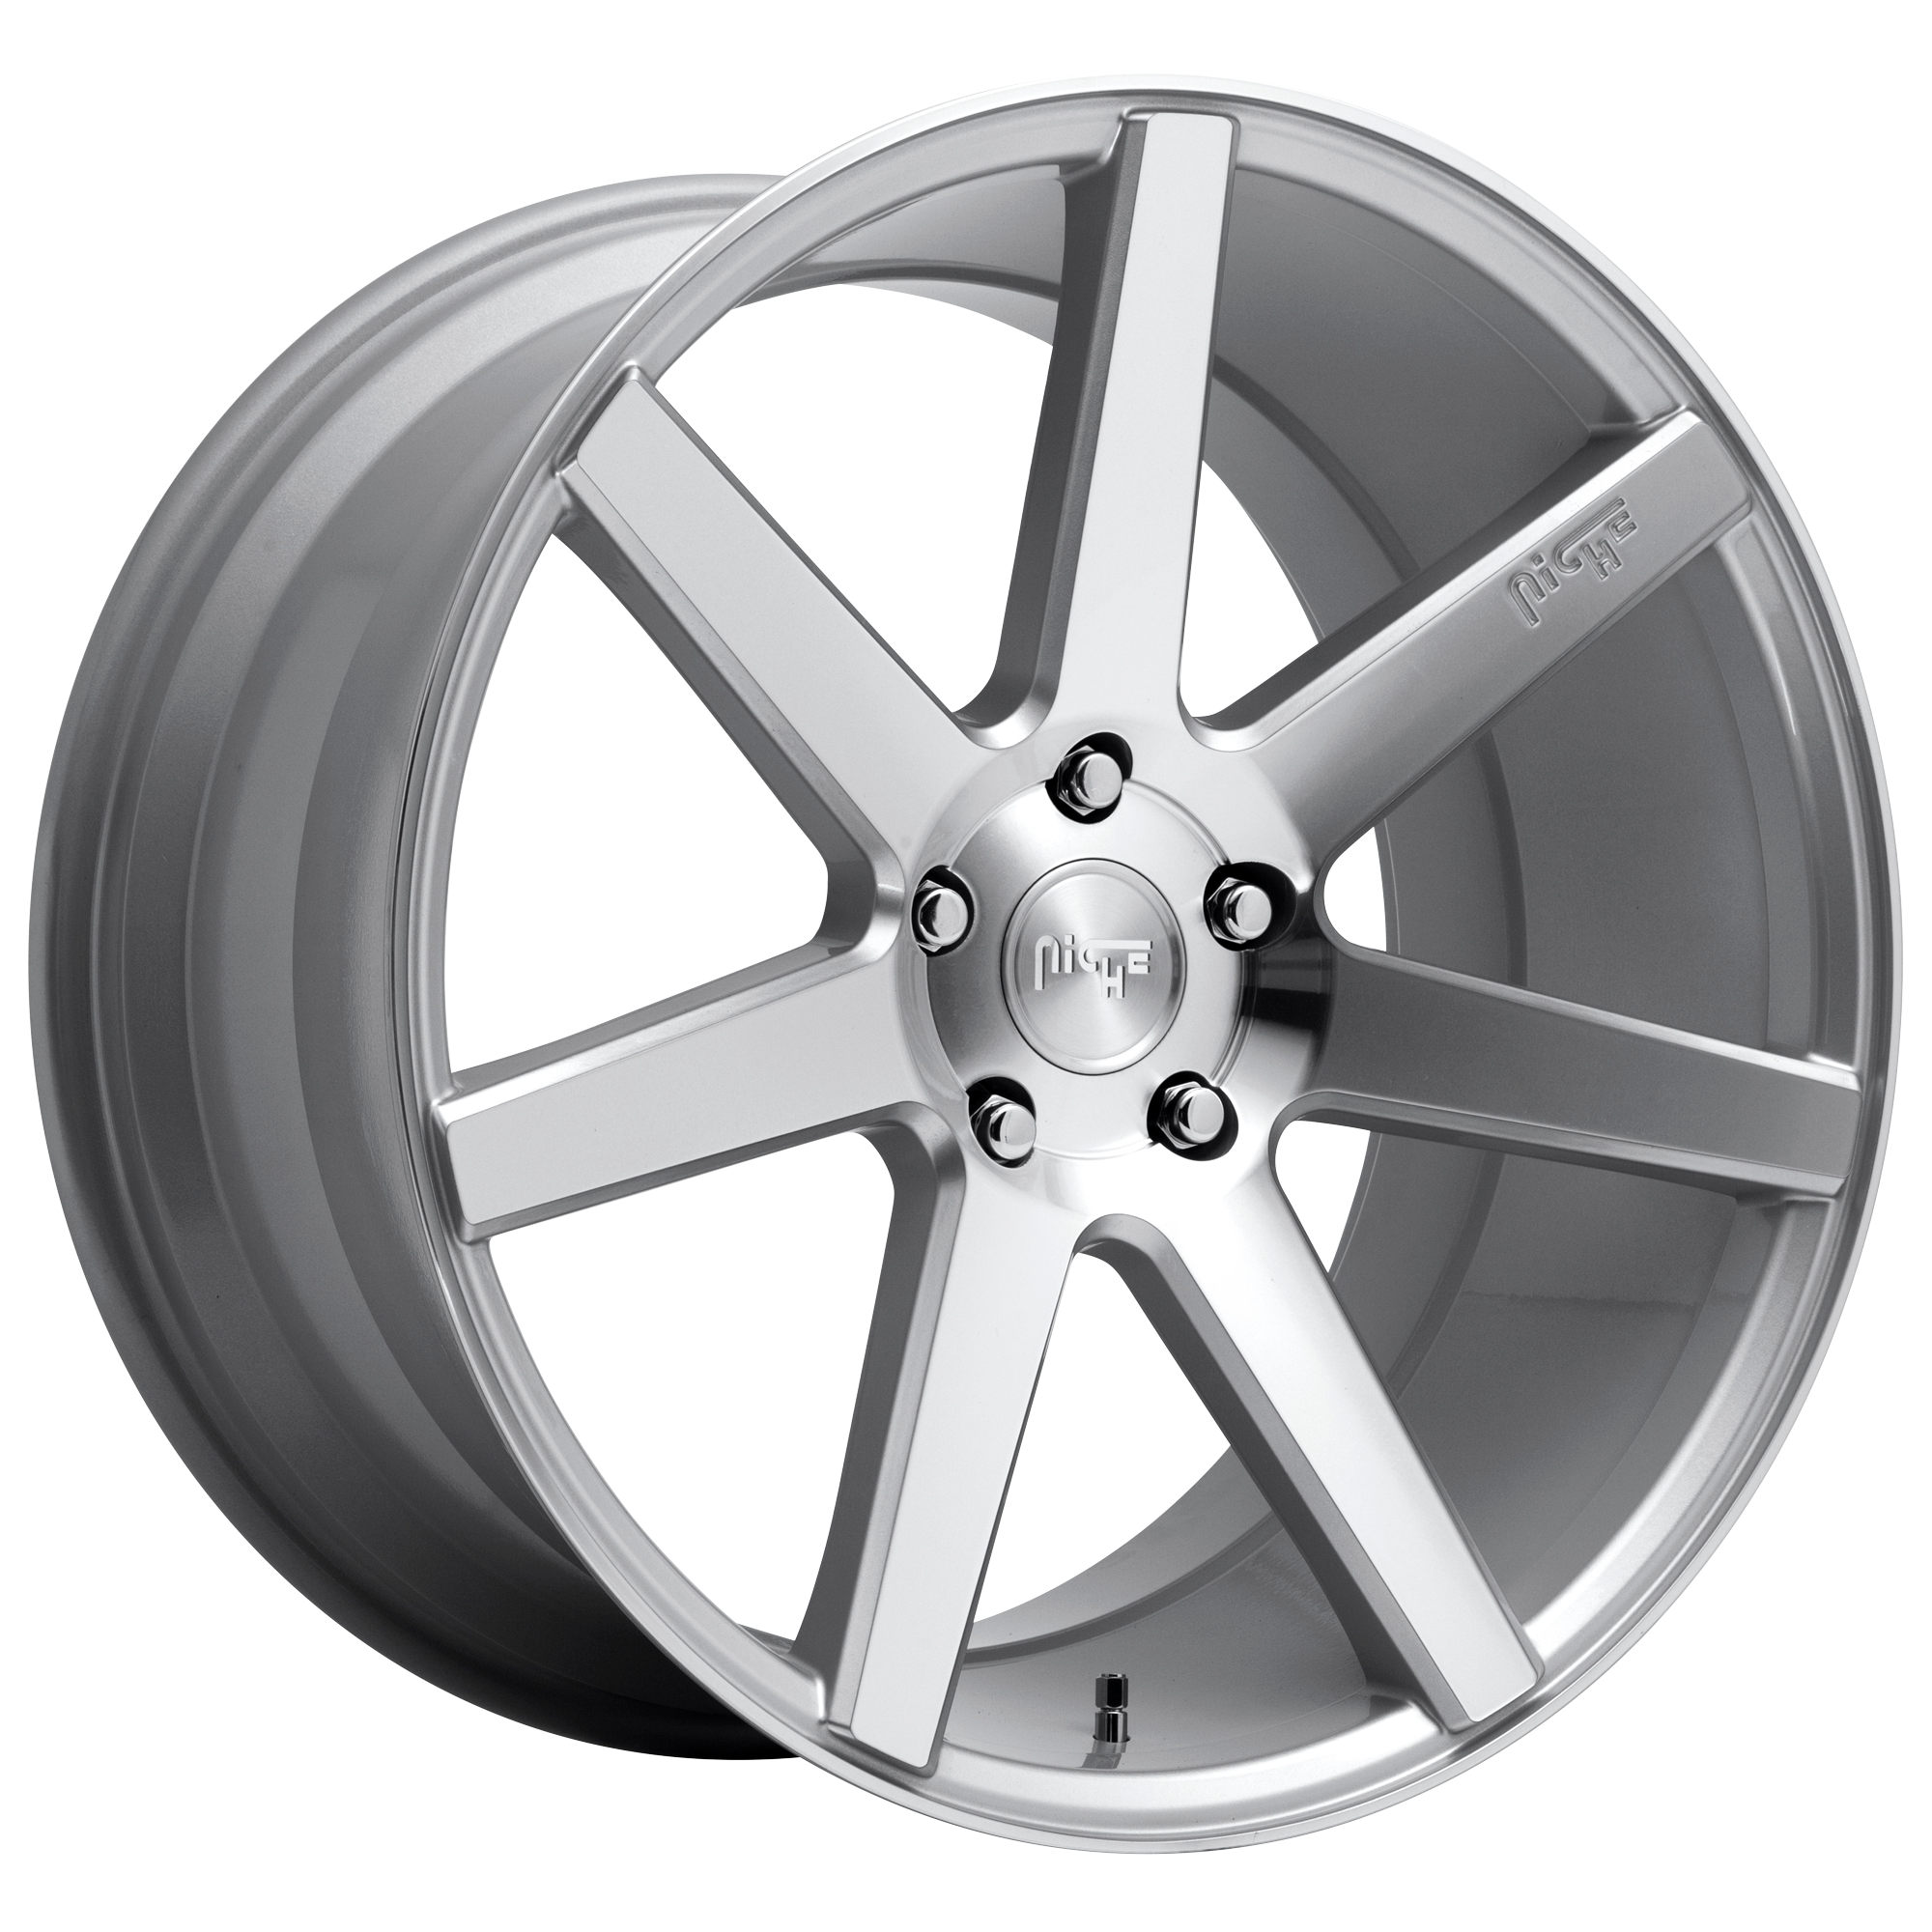 VERONA 19x8.5 5x112.00 GLOSS SILVER MACHINED (34 mm) - Tires and Engine Performance